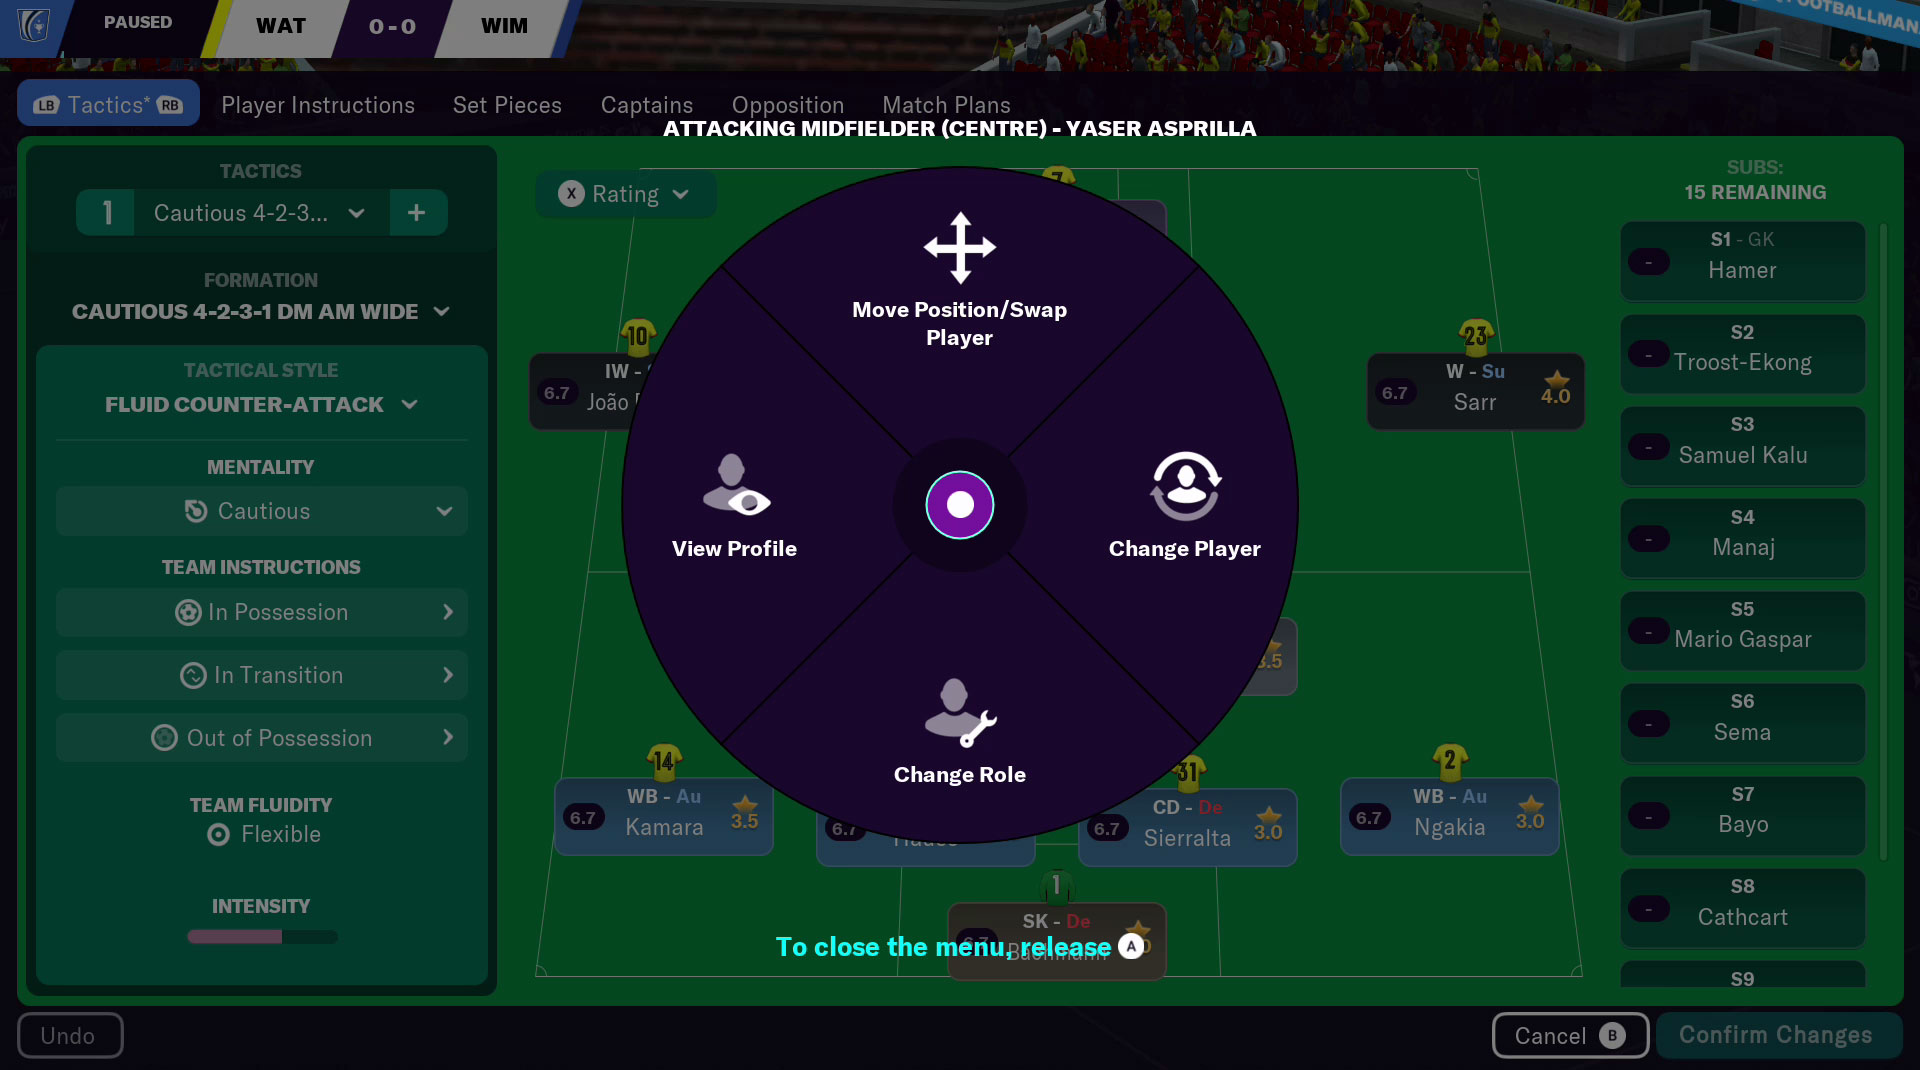 Football Manager 23, Software